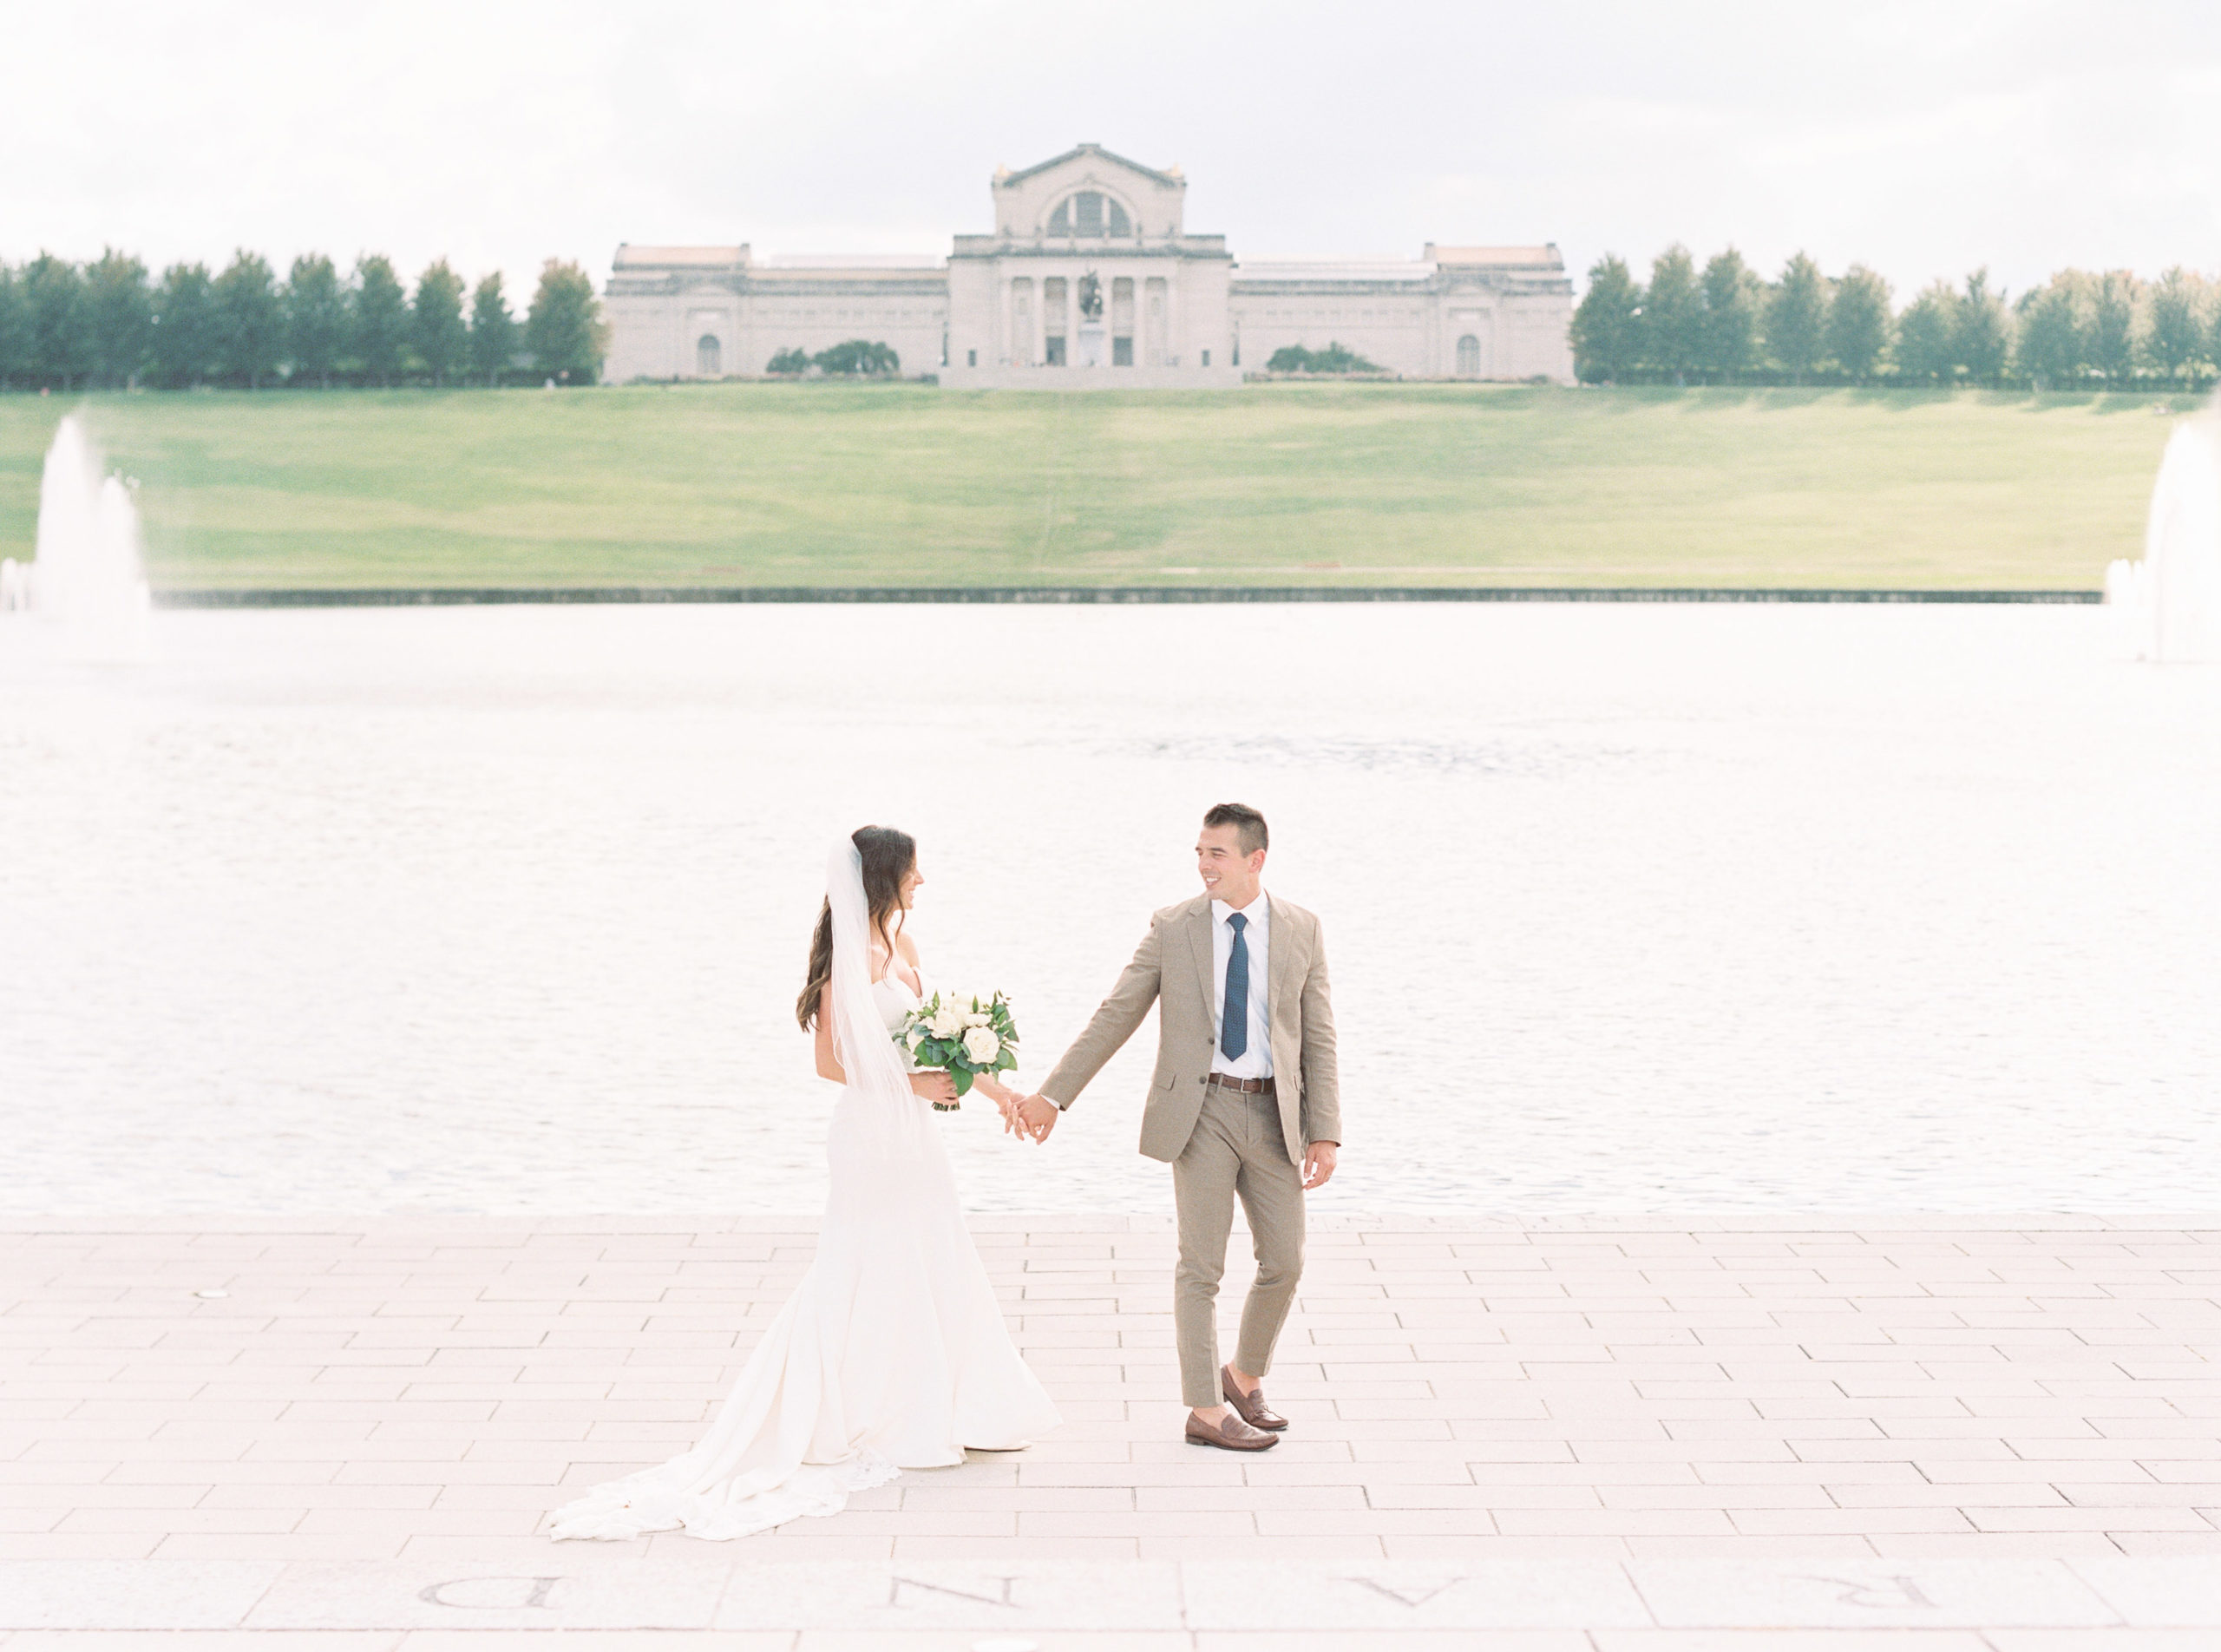 Forest Park Wedding Ceremony on film at the grand basin